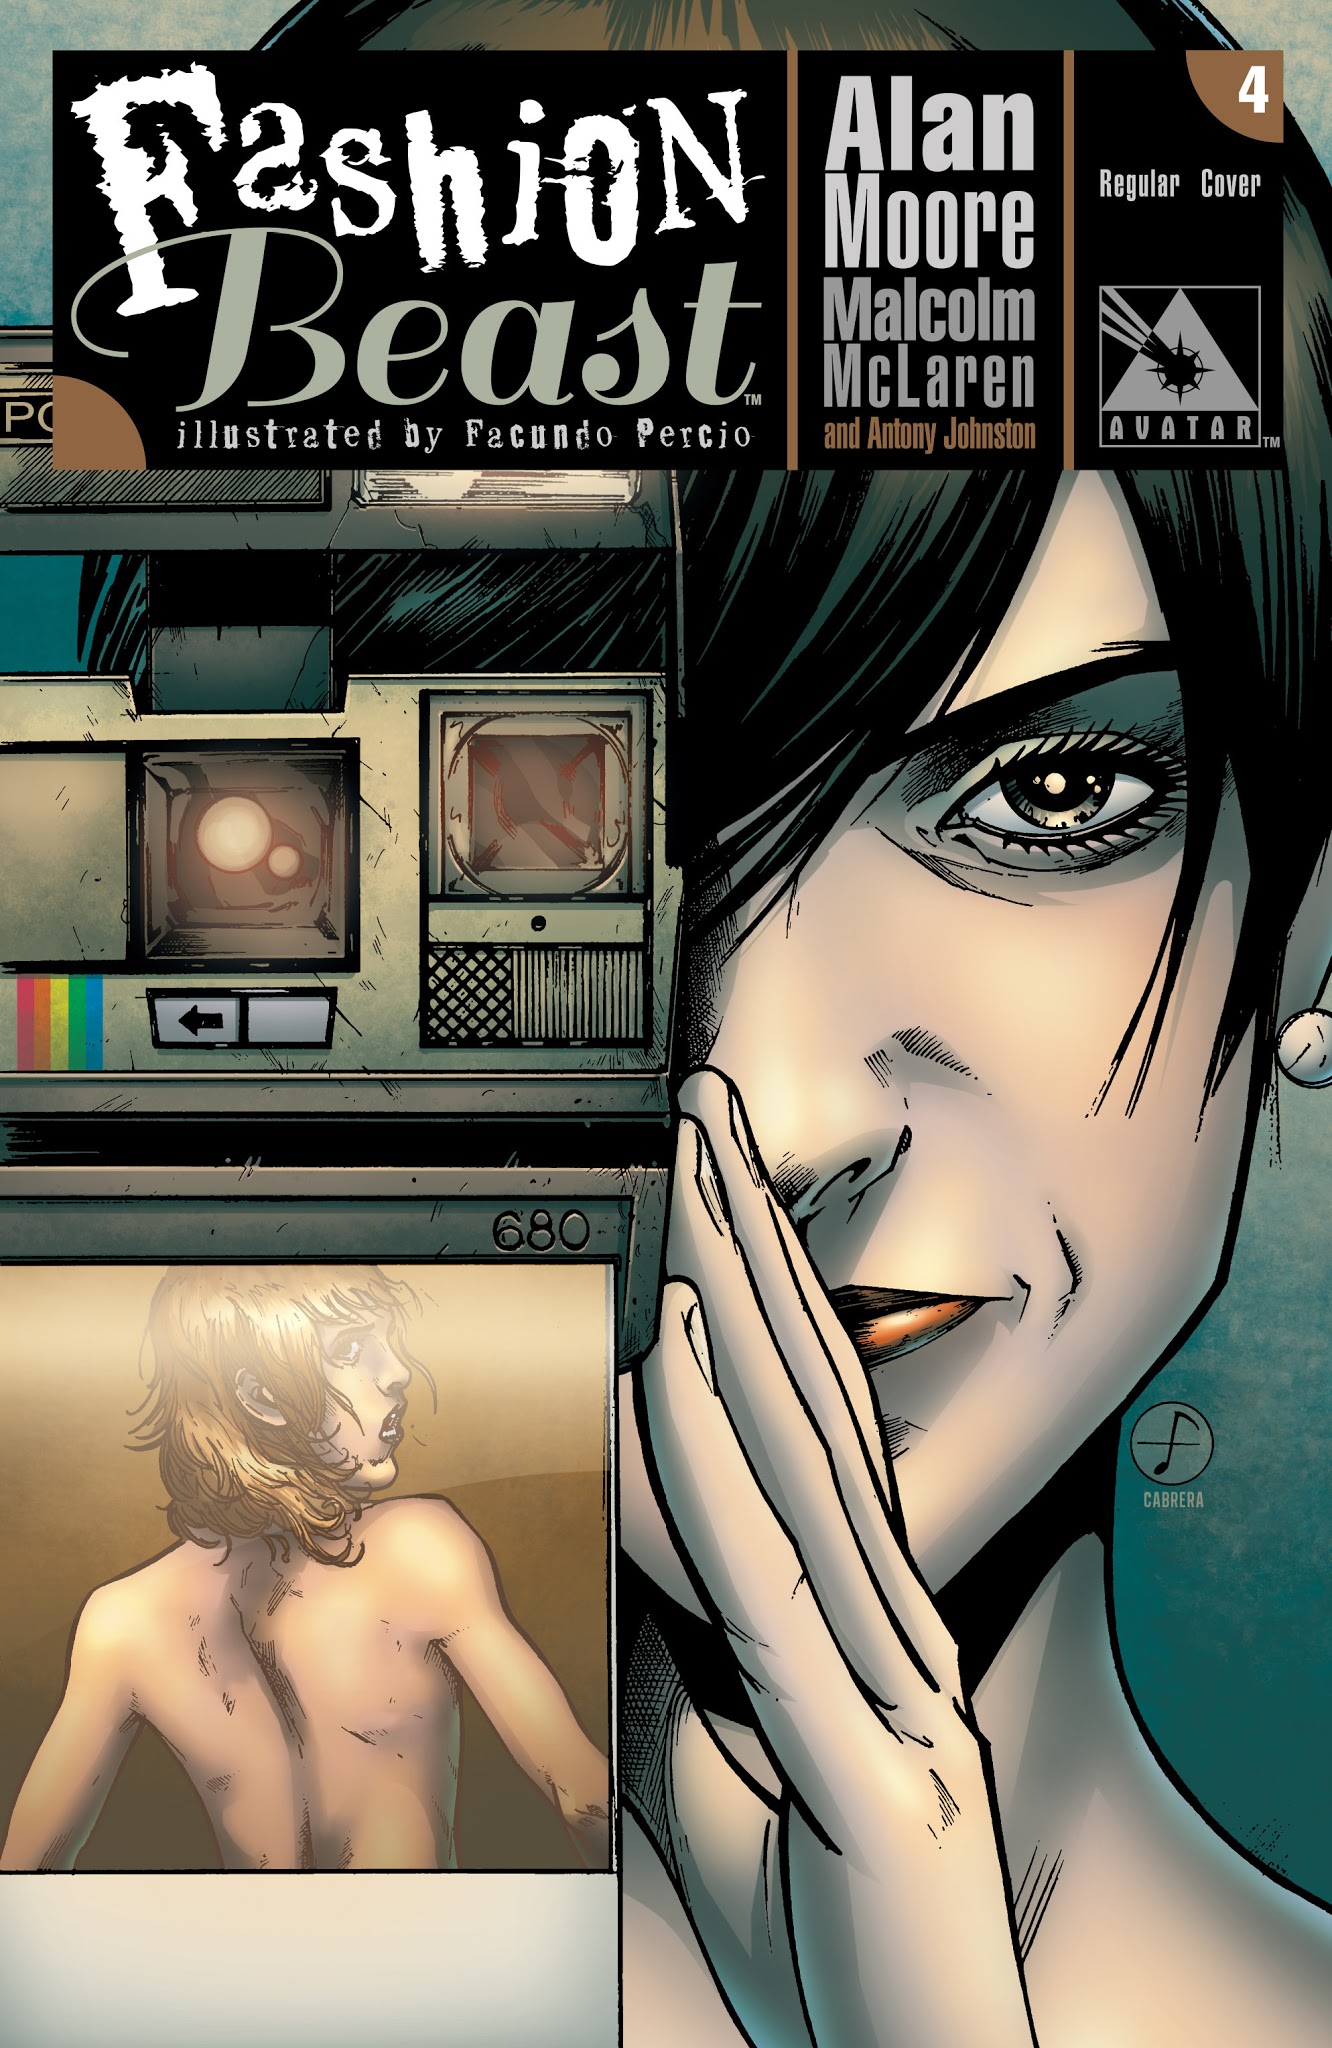 Read online Fashion Beast comic -  Issue #4 - 1